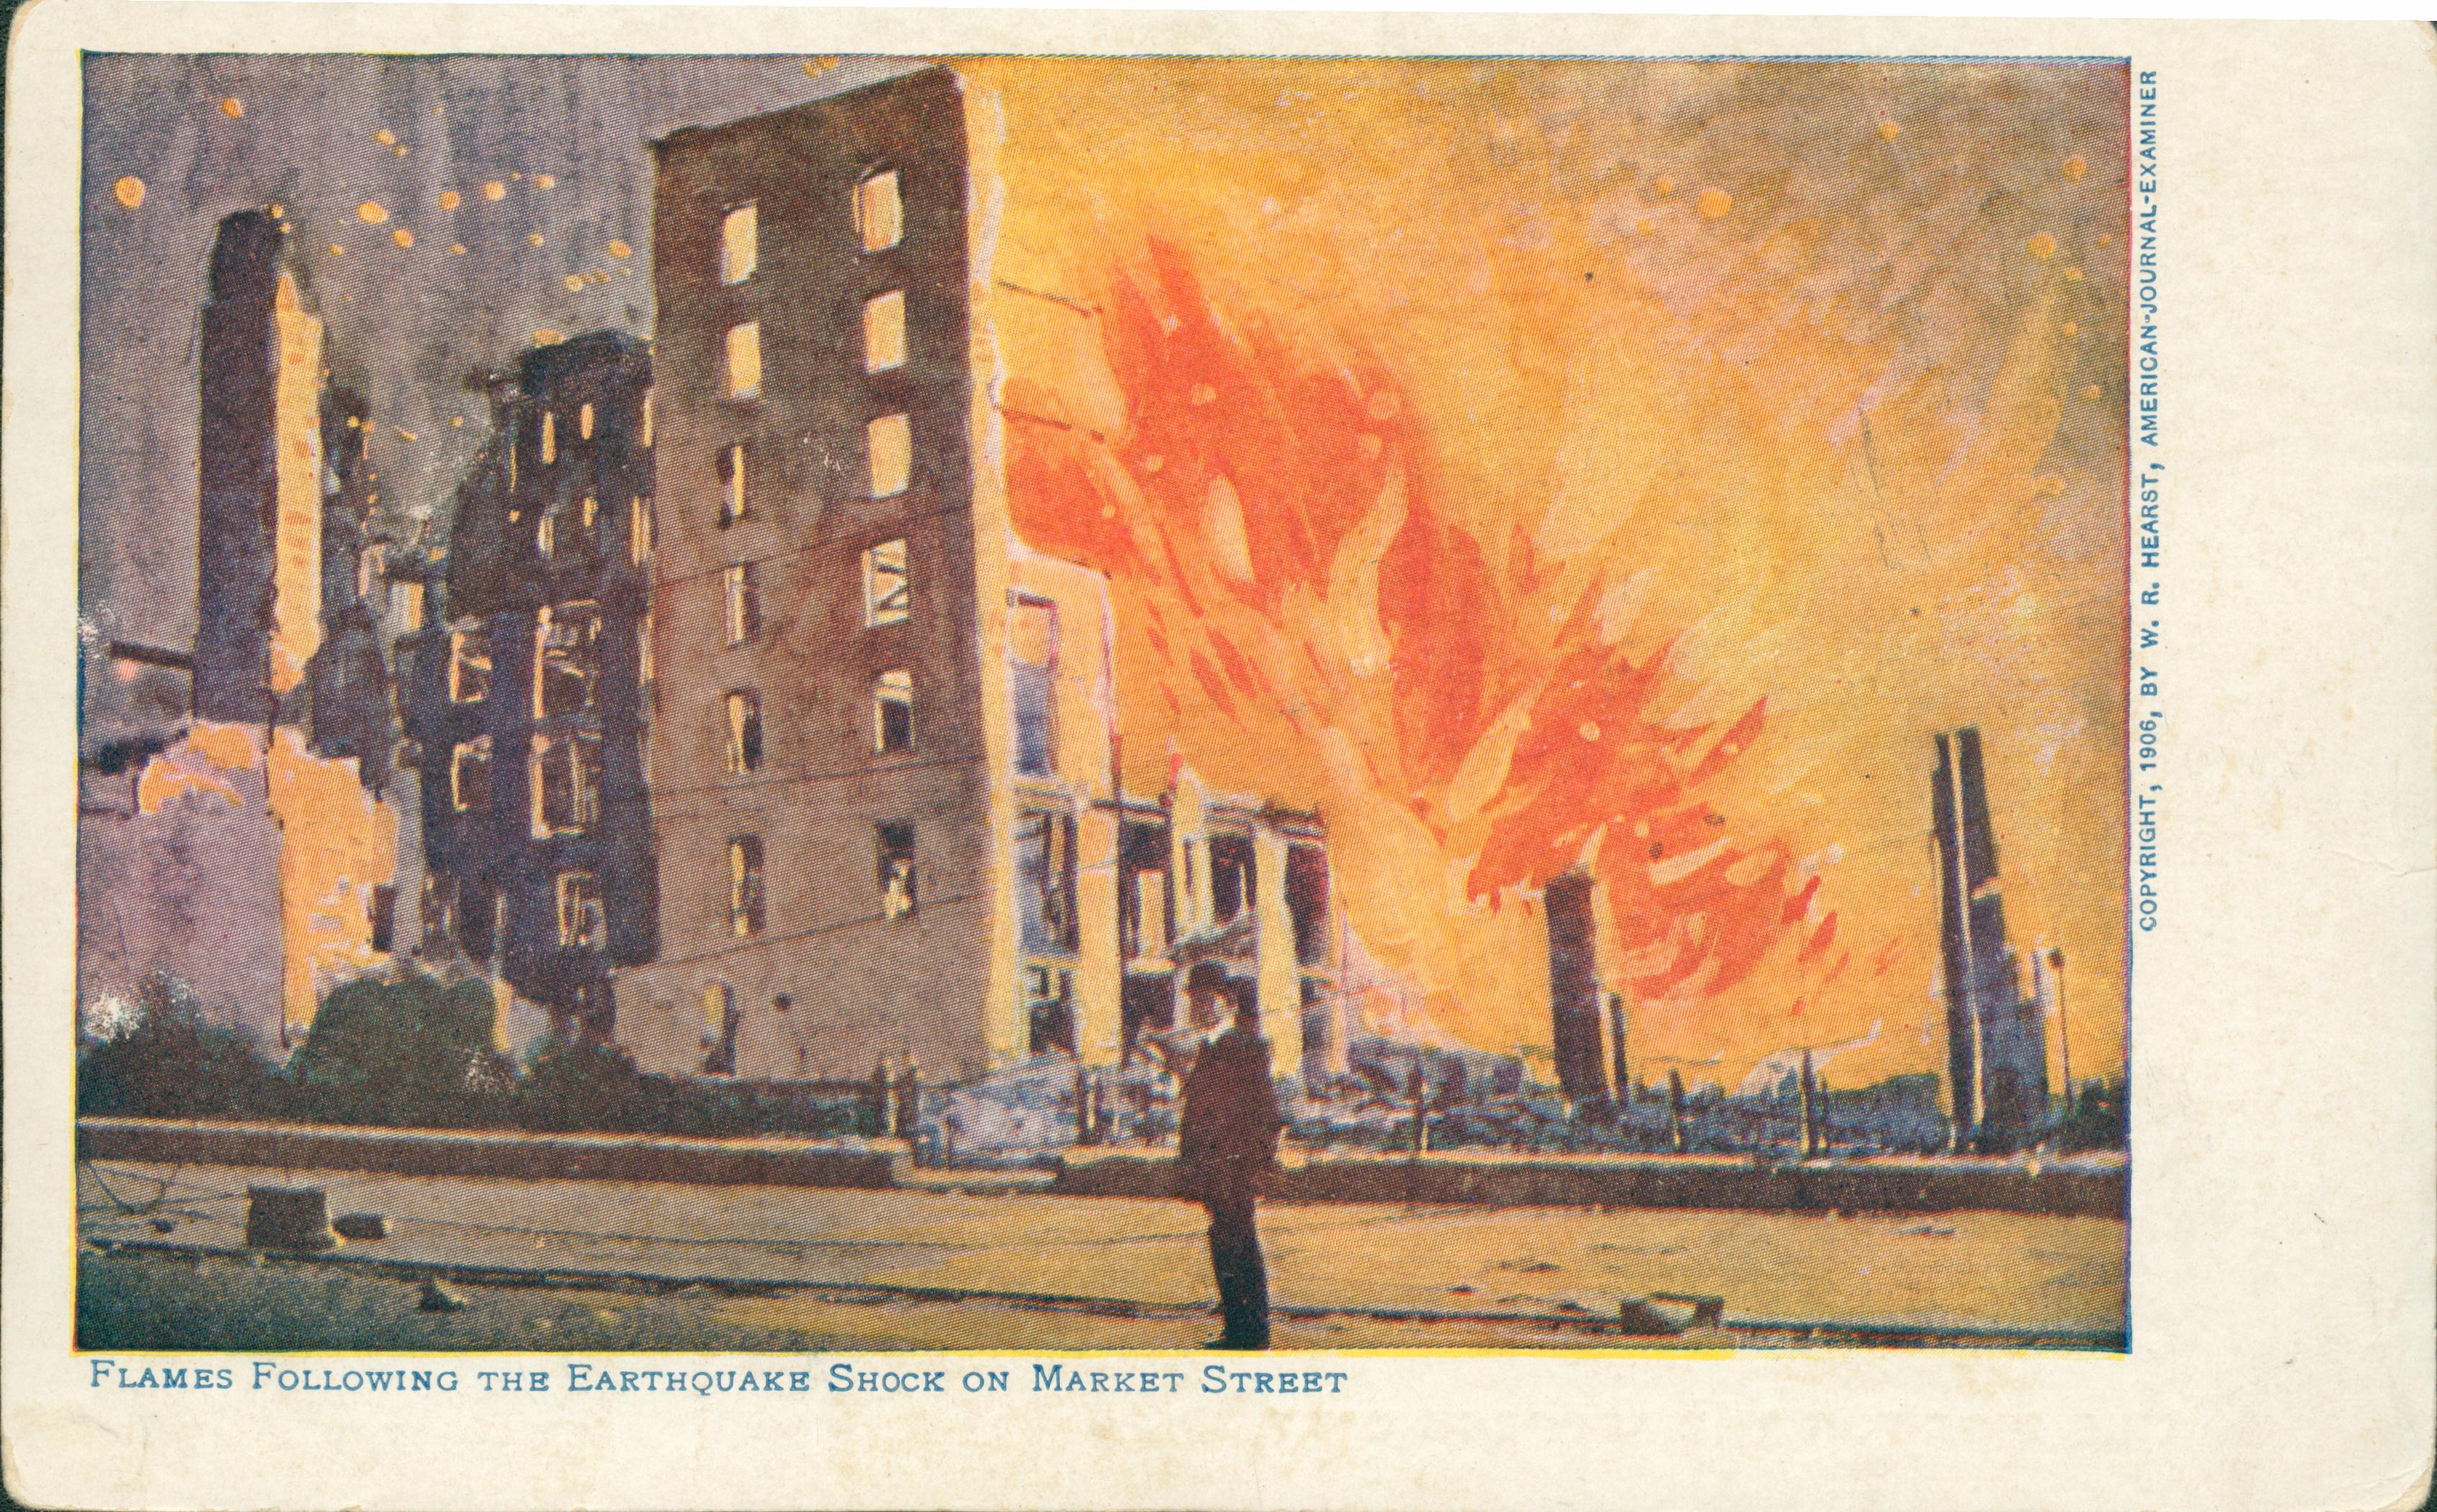 A drawing of man standing in front of a burning building.